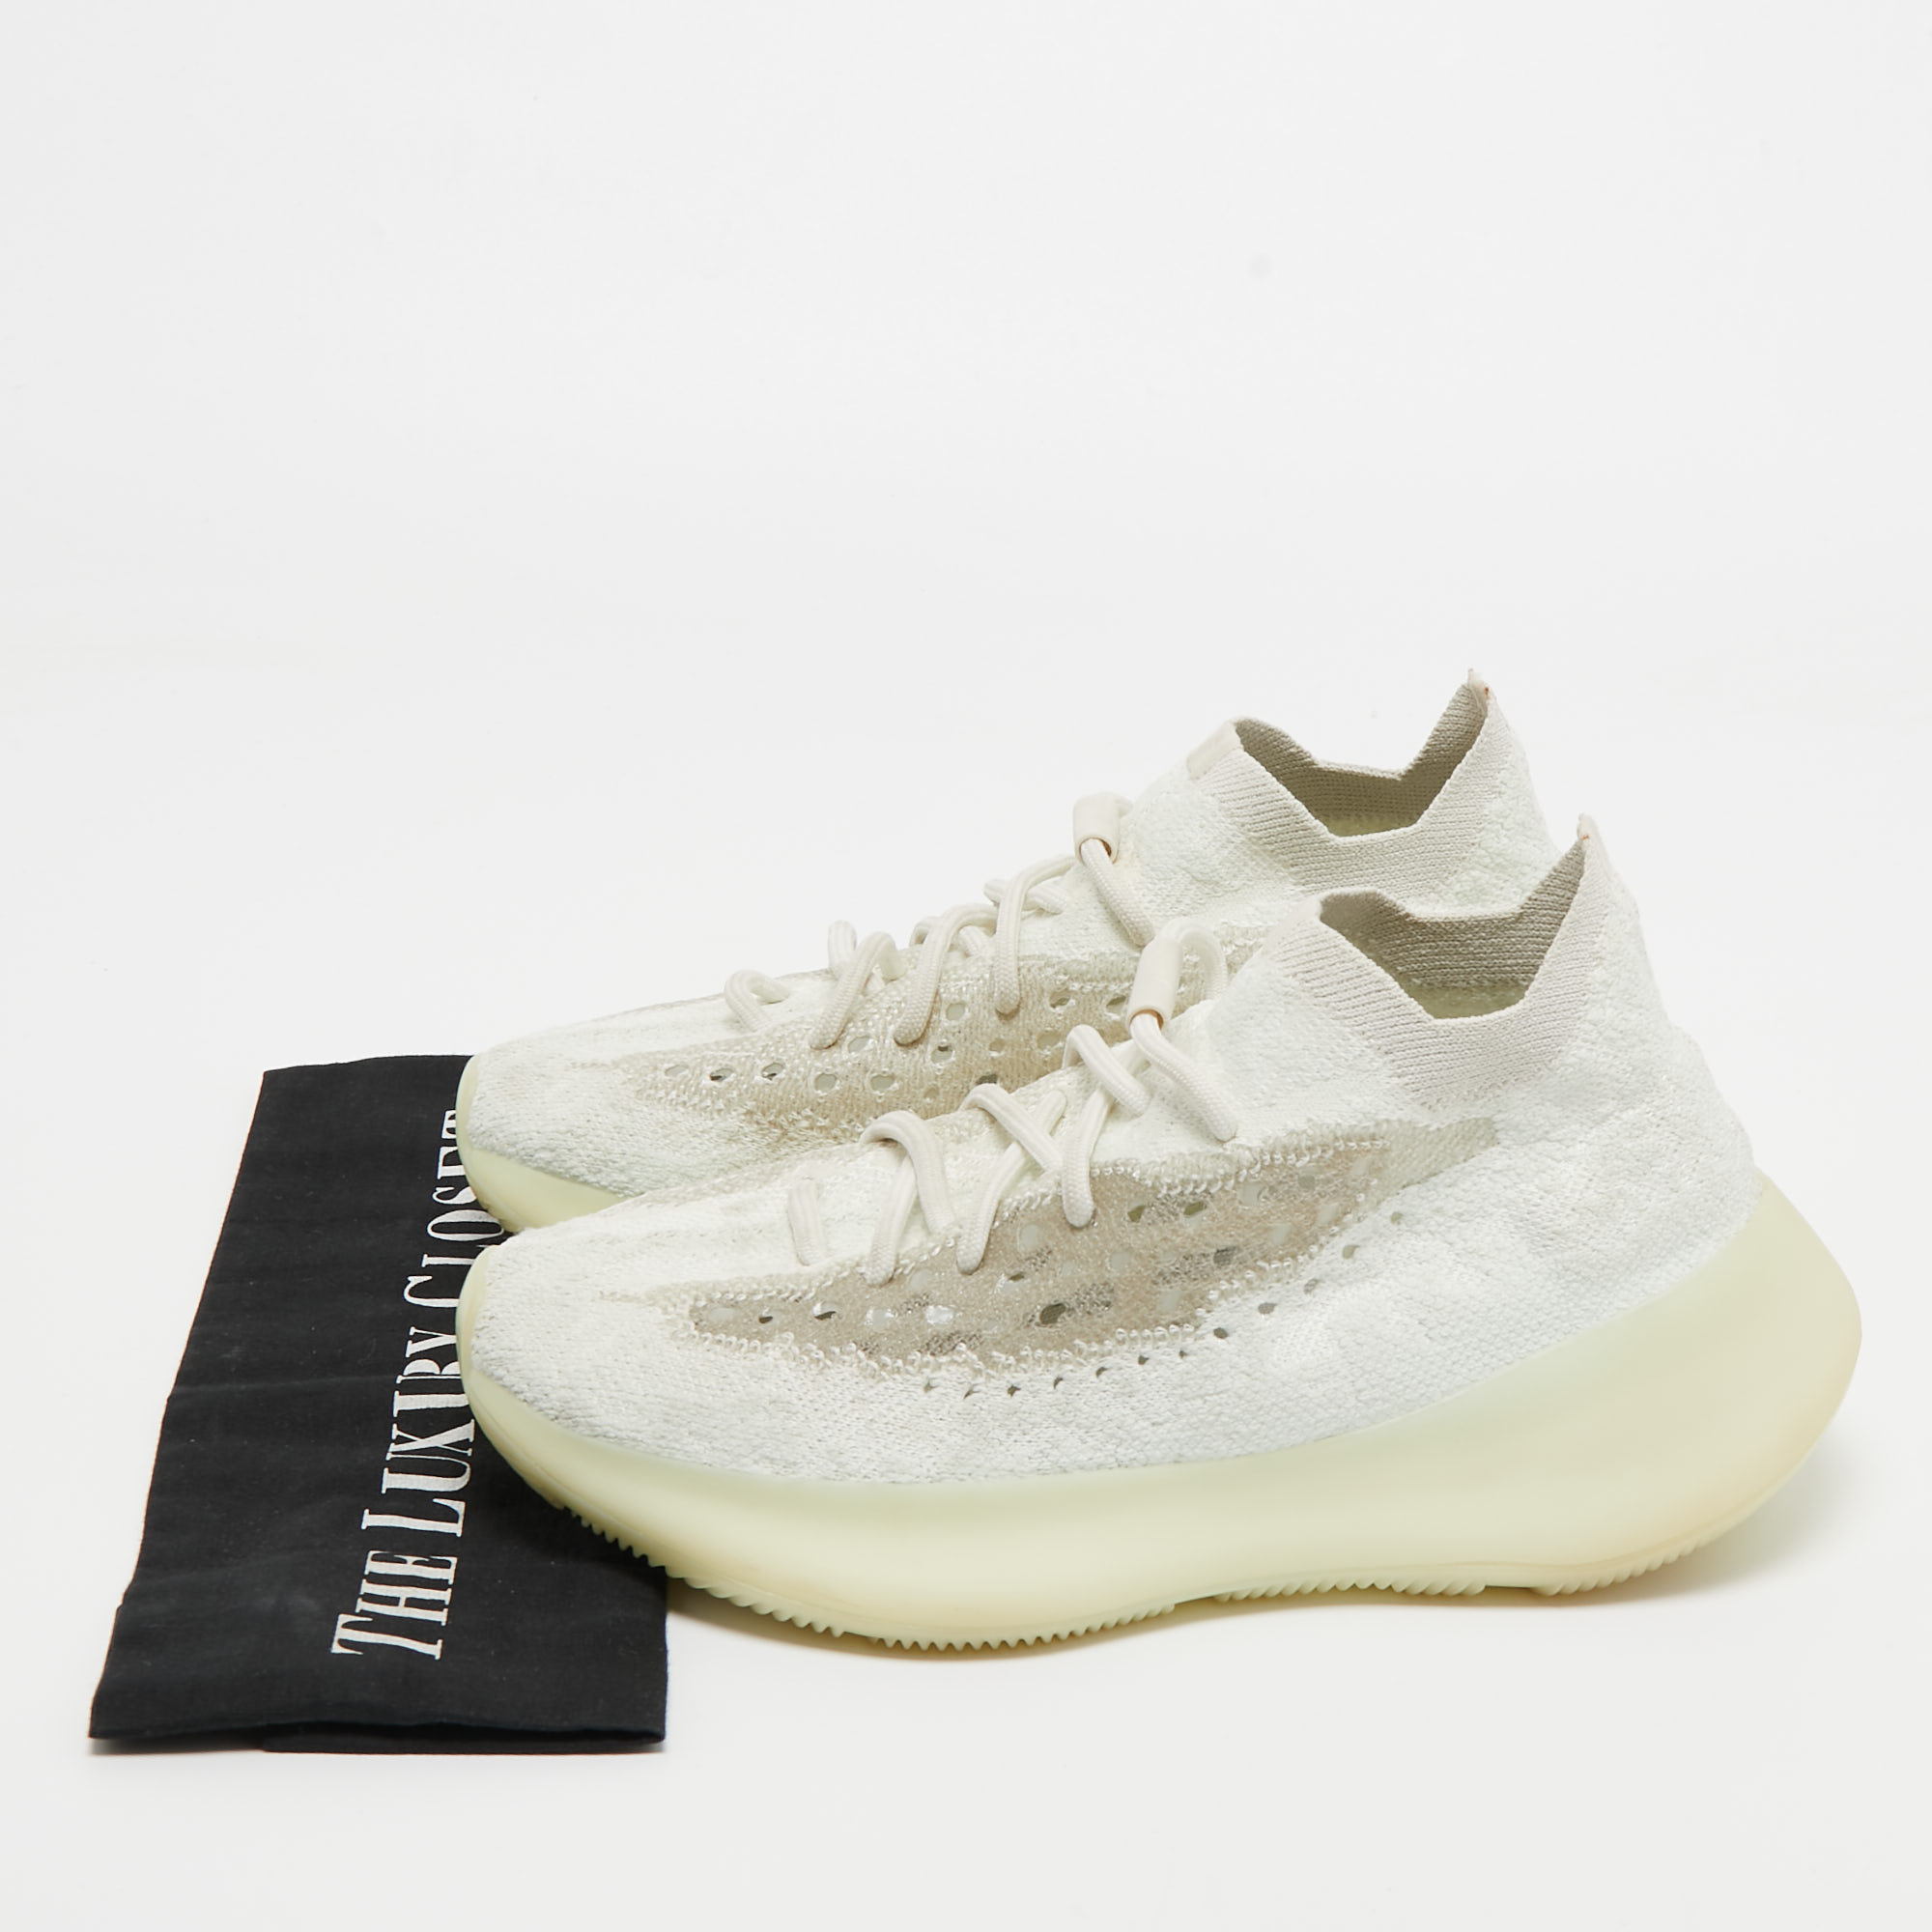 Yeezy X Adidas White Knit Fabric Boost 380 Calcite-Glow Sneakers Size 39 1/3